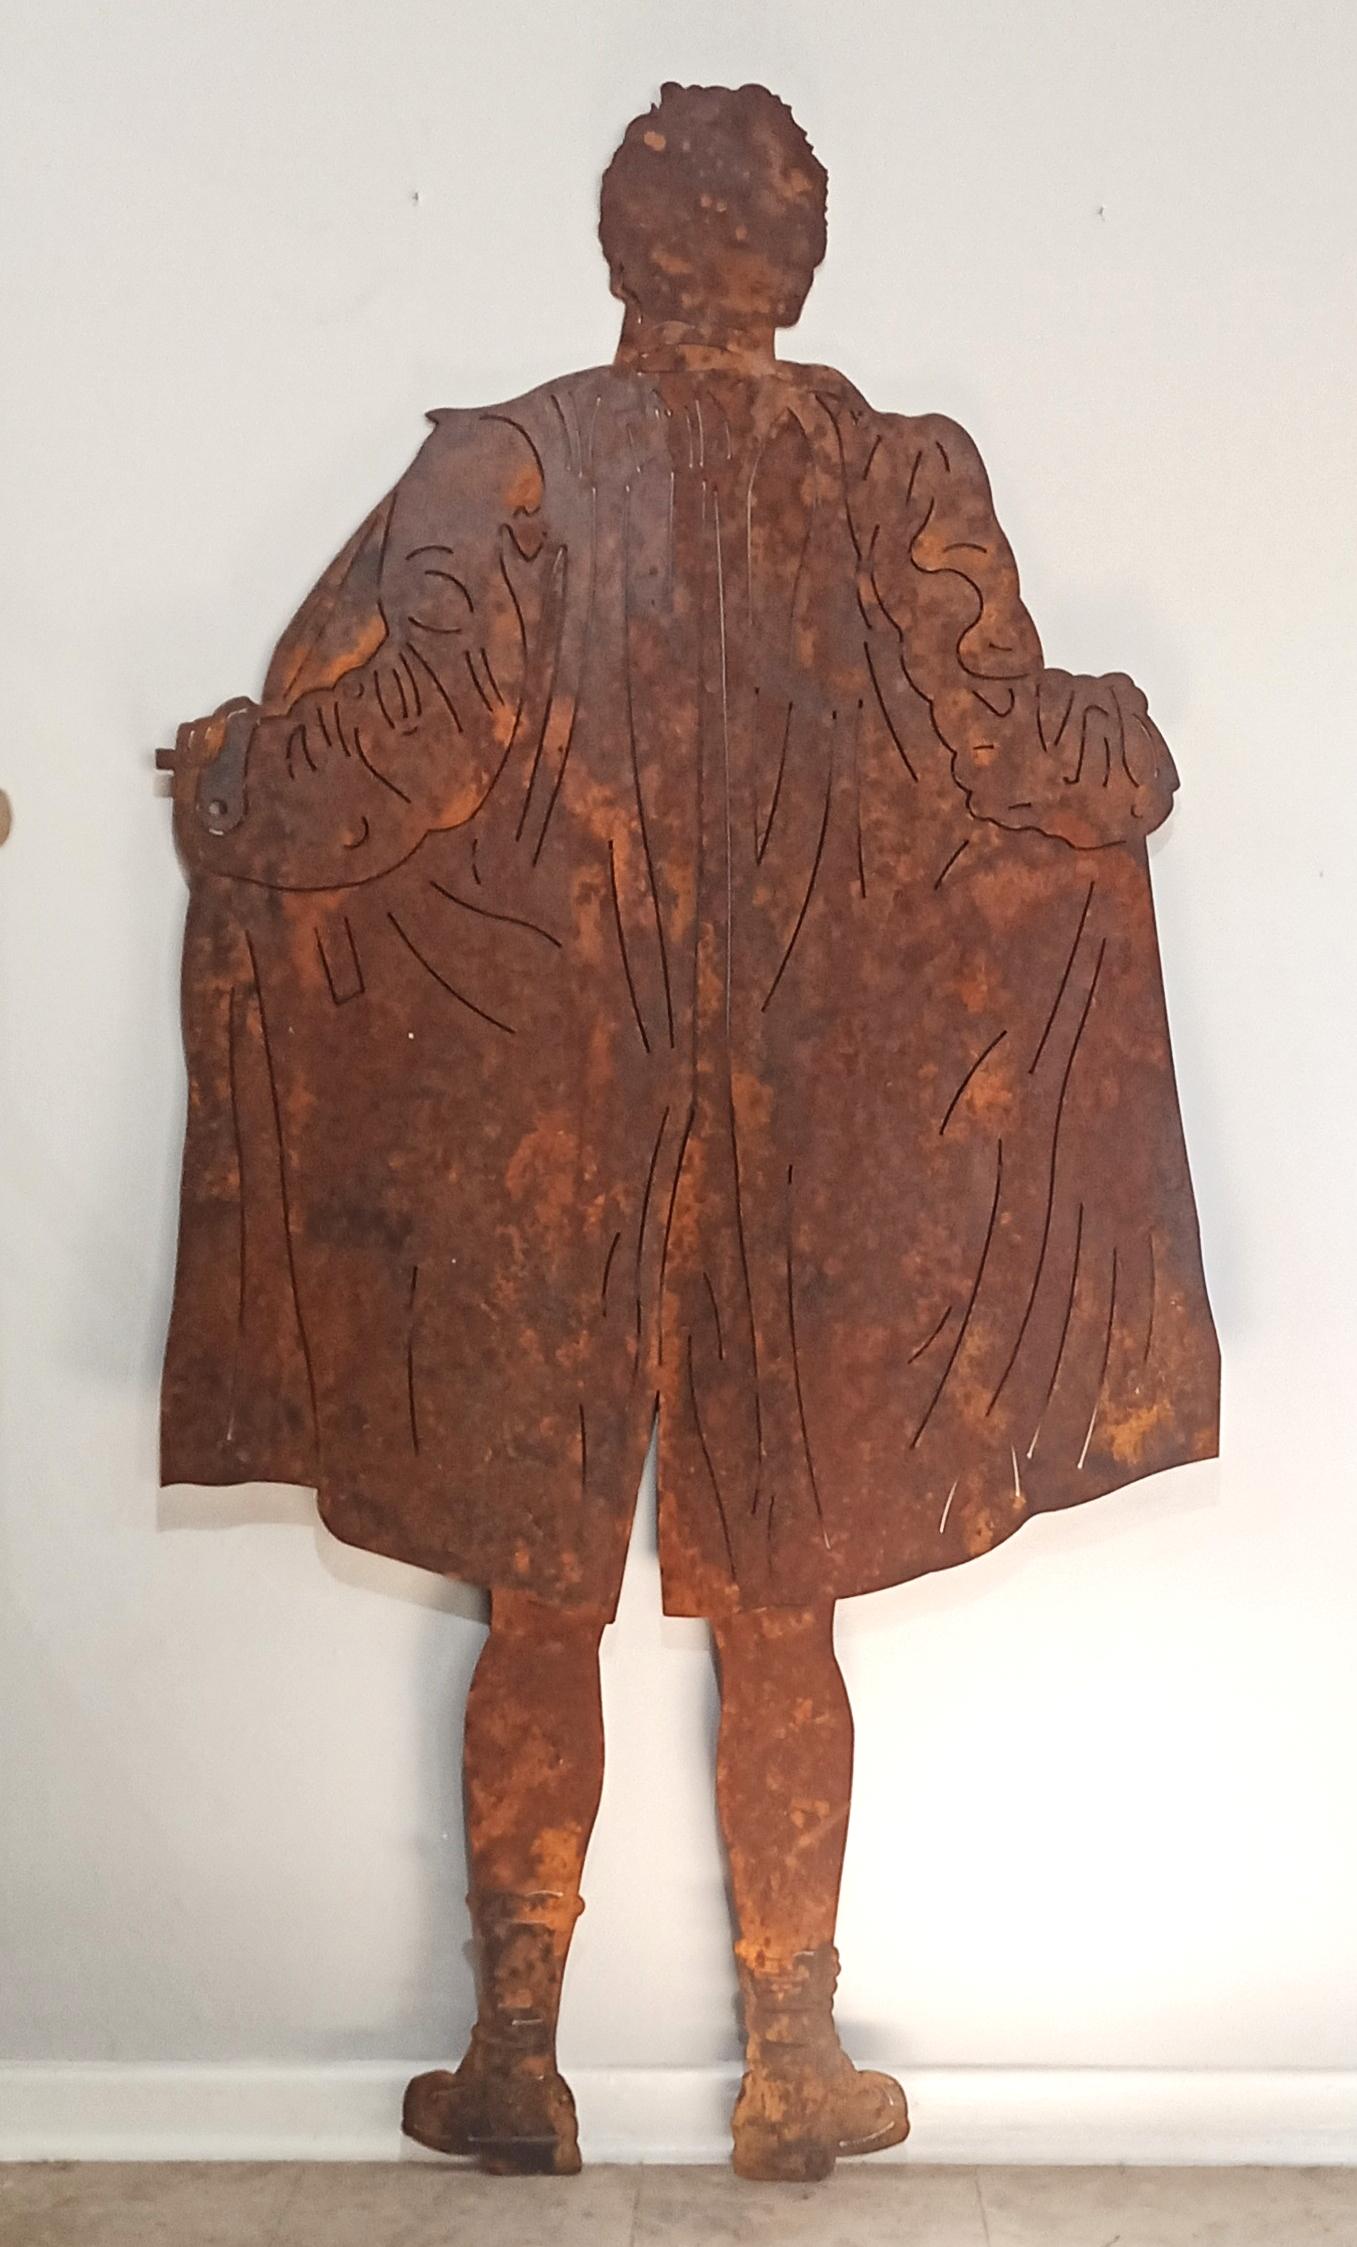 Large Limited Edition Rusted Steel Wall Mounted Sculpture "Flasher"